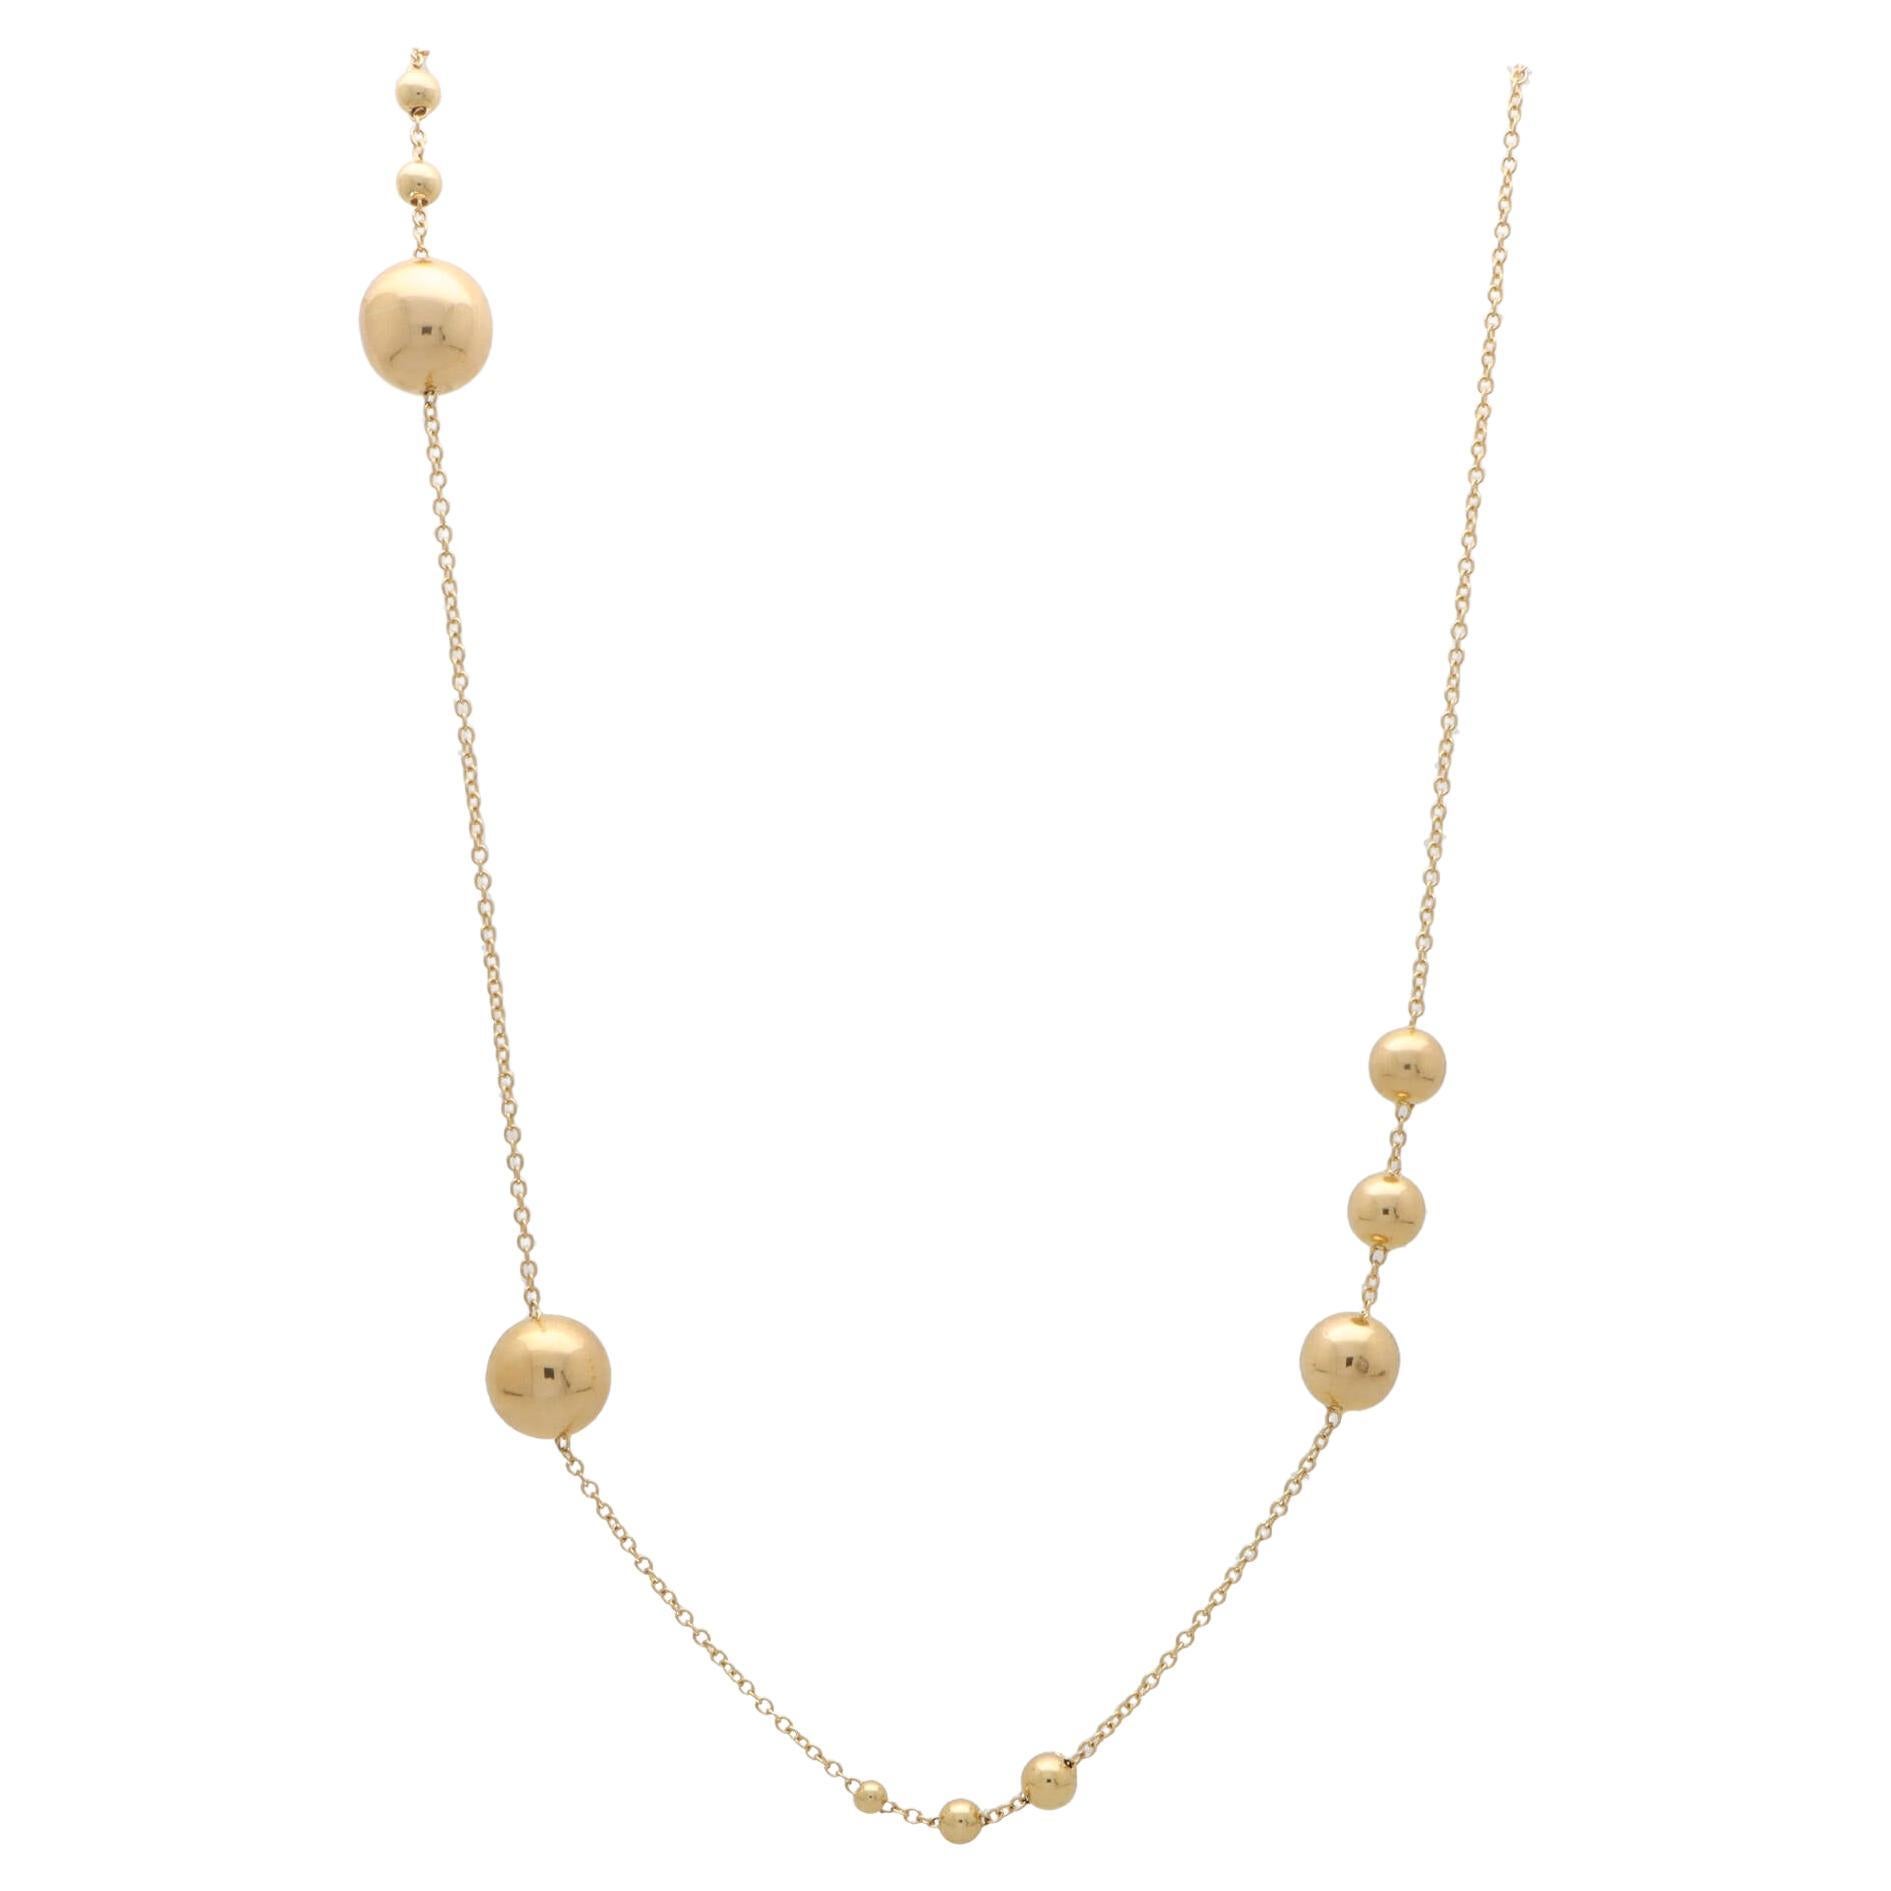 Contemporary Golden Ball 34-inch Chain Necklace Set in 18k Yellow Gold For Sale